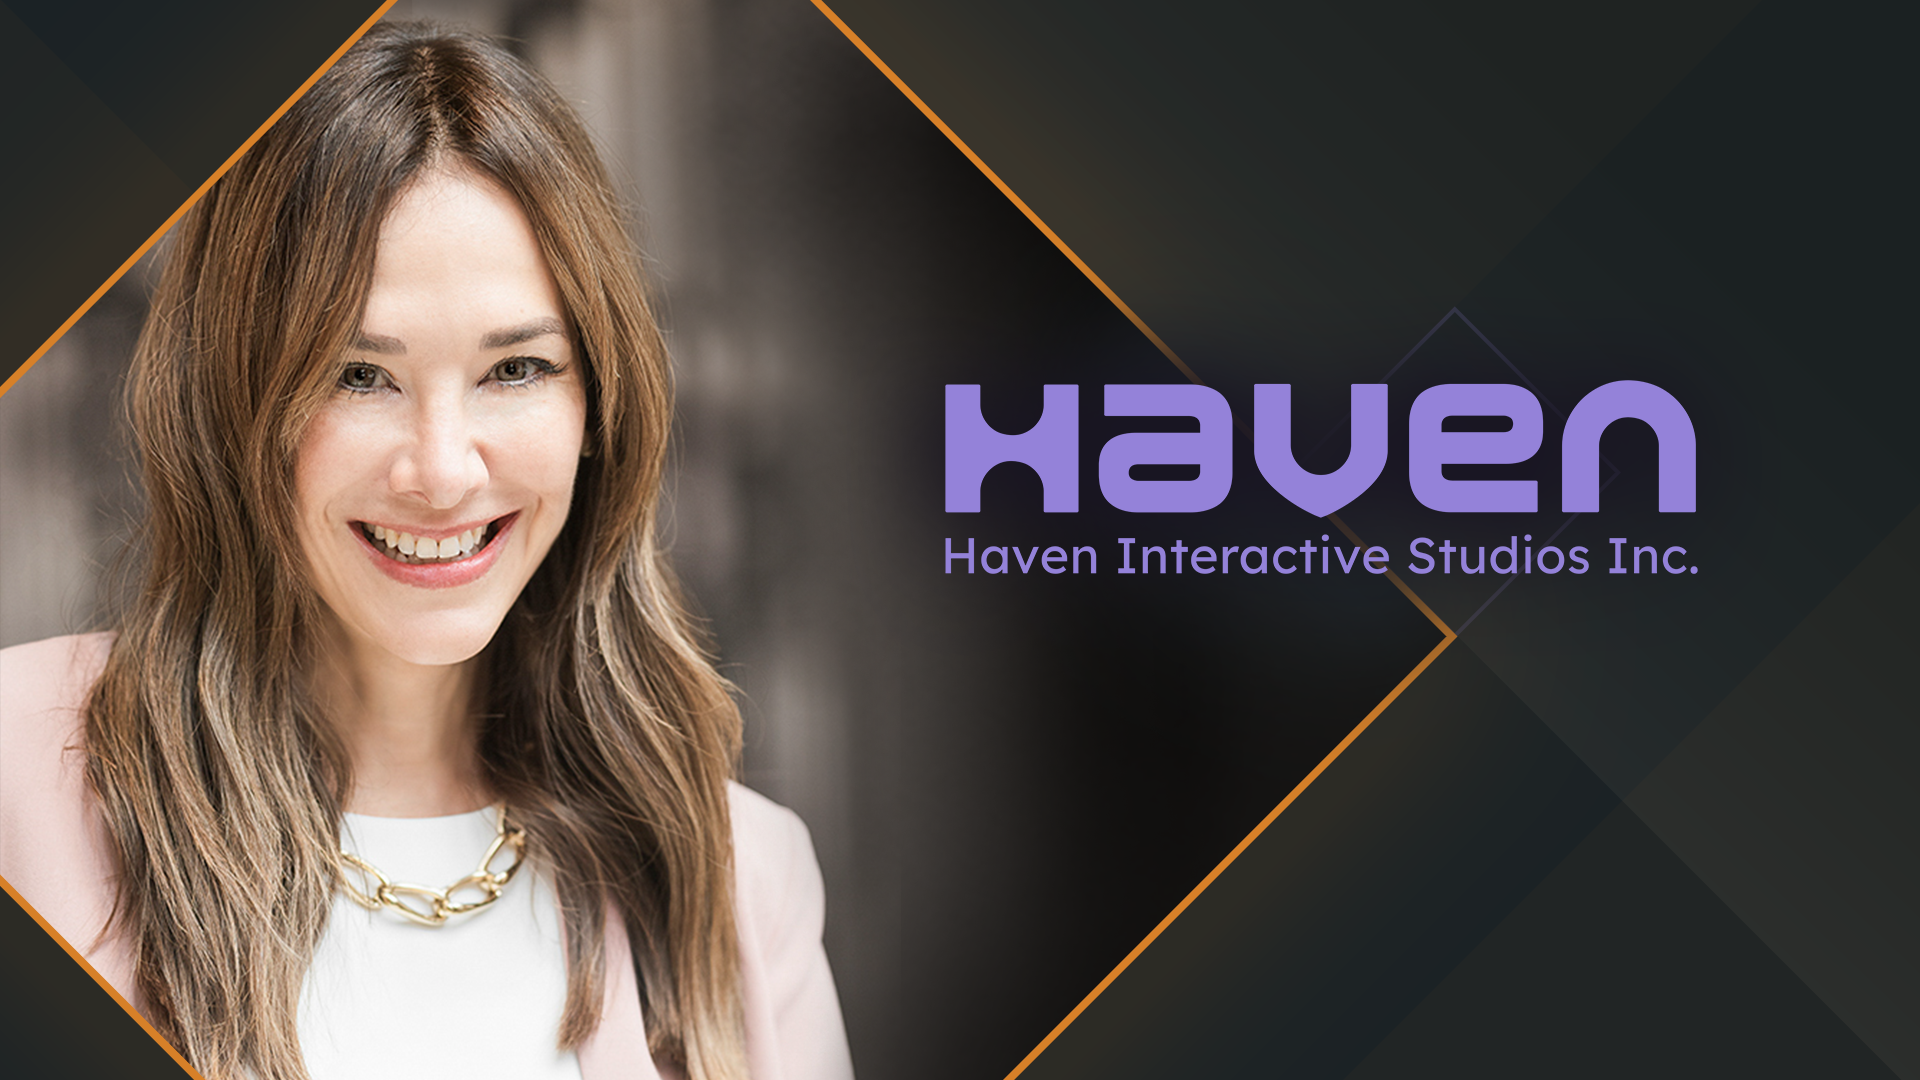 Jade Raymond featured on the left. On the right, the Haven Studios logo that reads Haven Interactive Studios Inc.